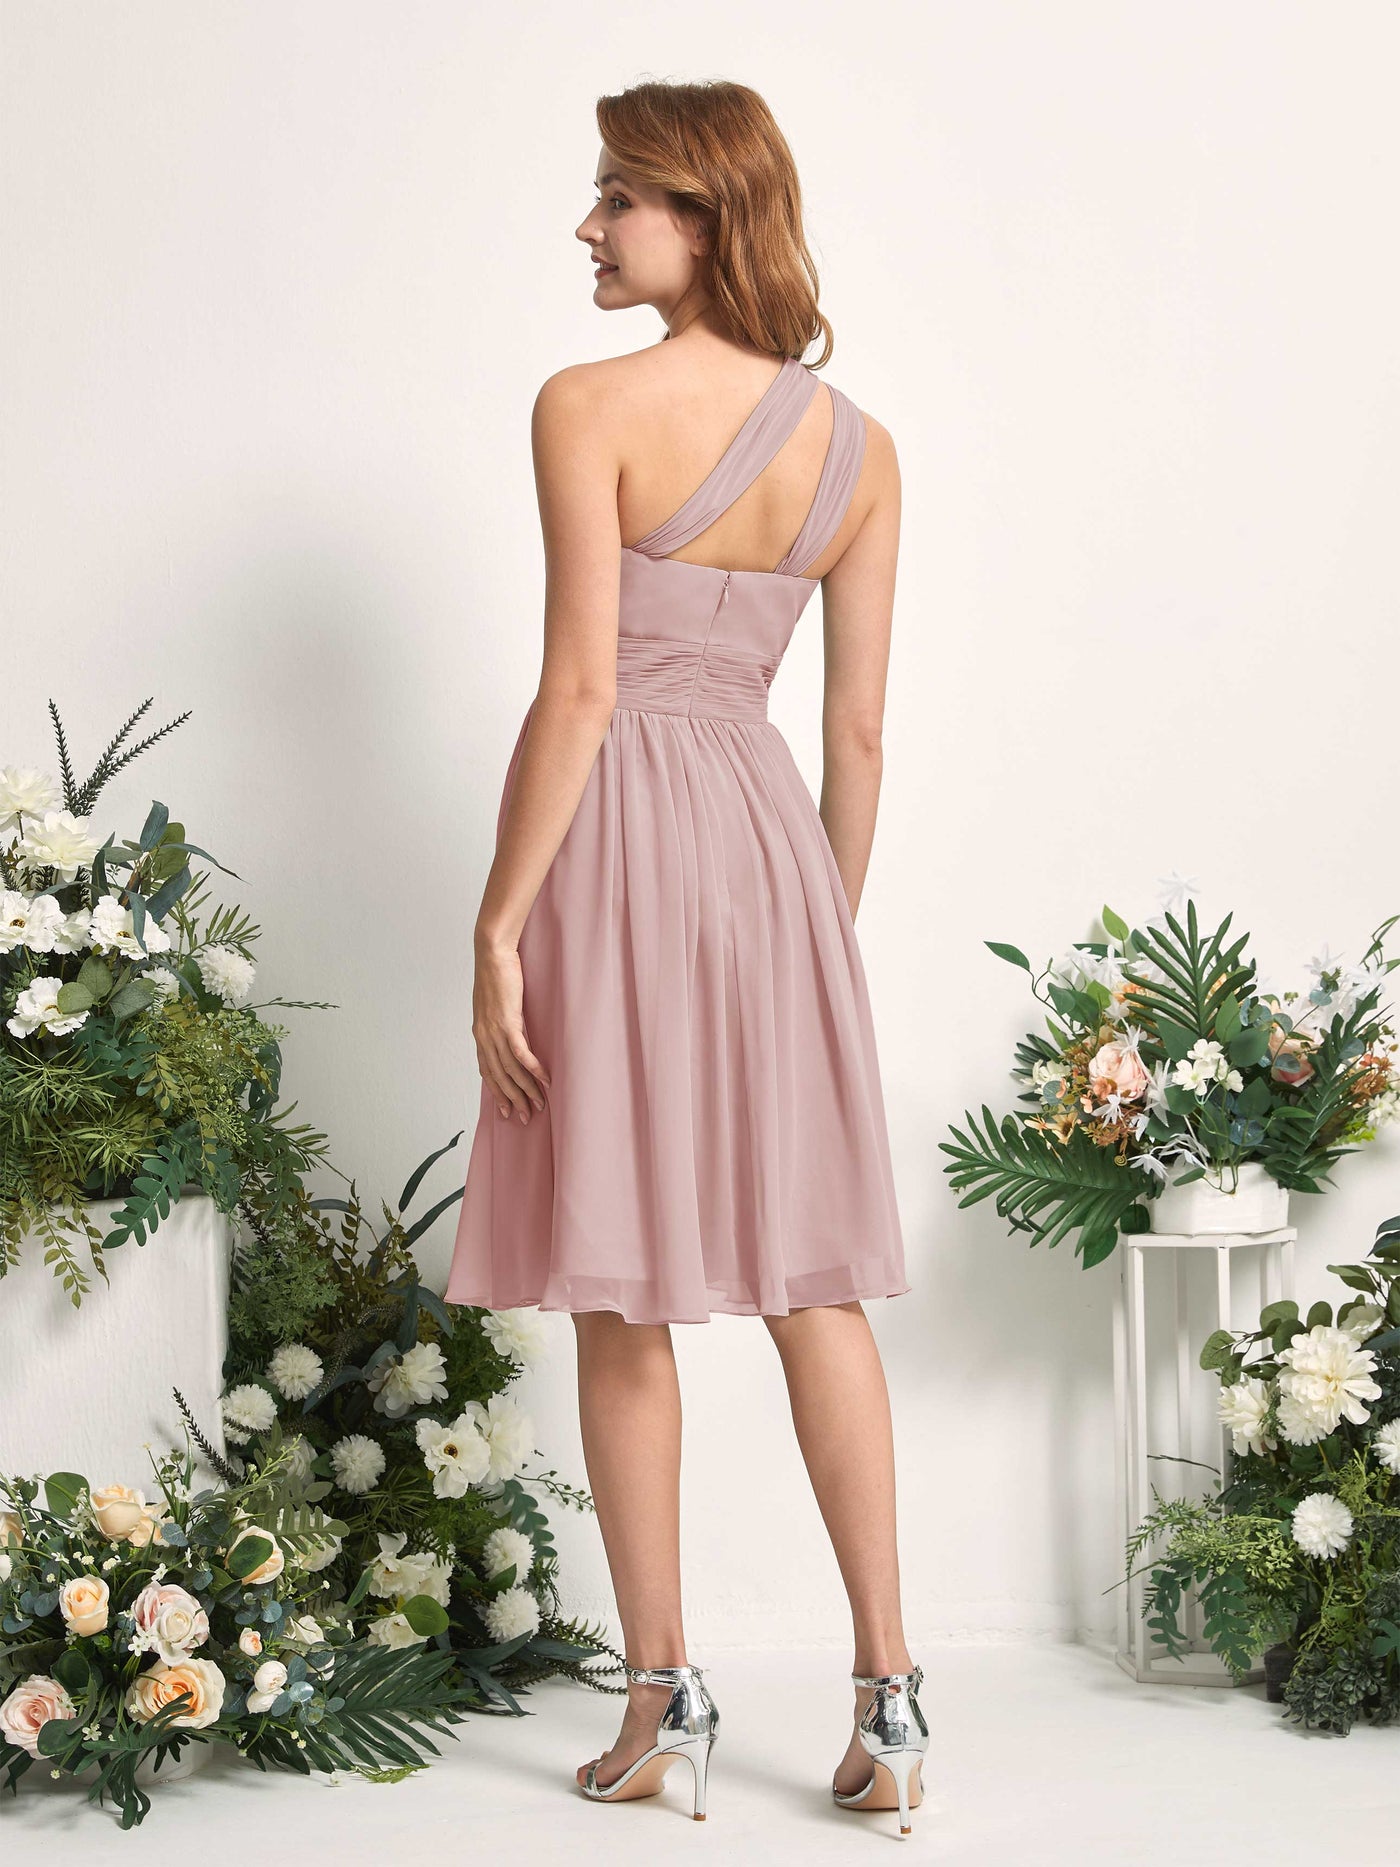 Bridesmaid Dress A-line Chiffon One Shoulder Knee Length Sleeveless Wedding Party Dress - Dusty Rose (81221209)#color_dusty-rose